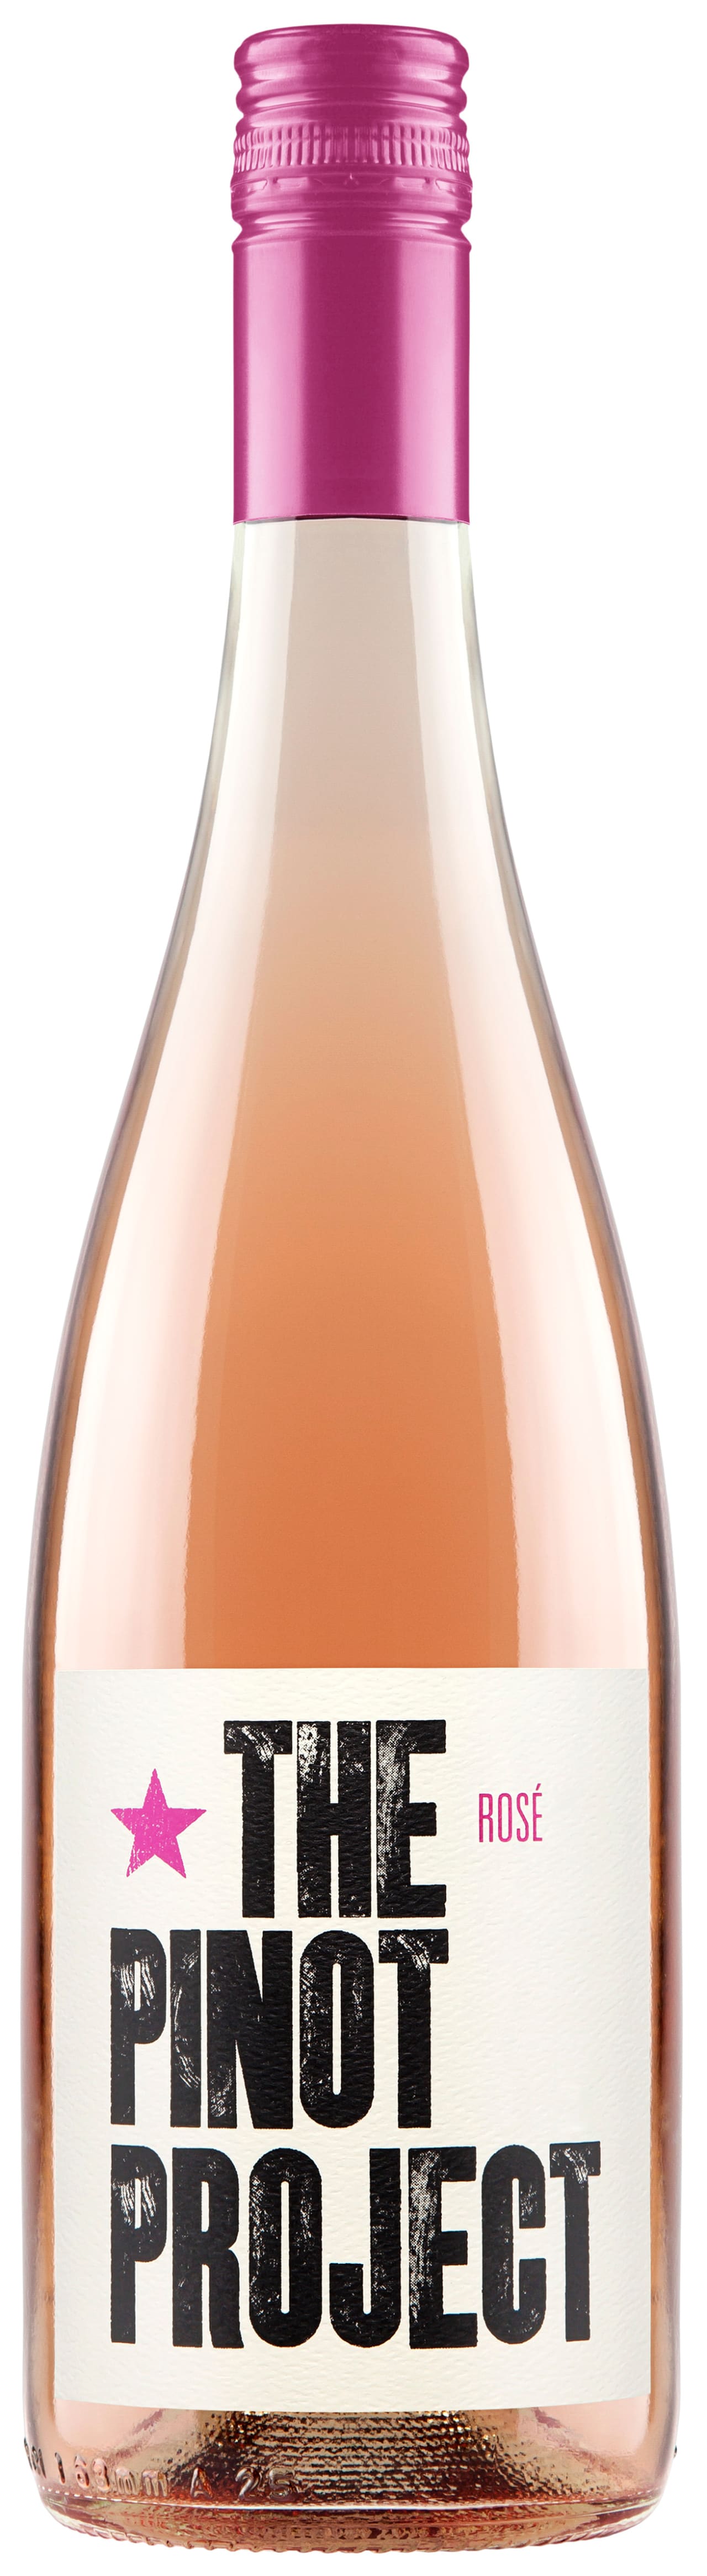 Rose 'France', The Pinot Project 2021